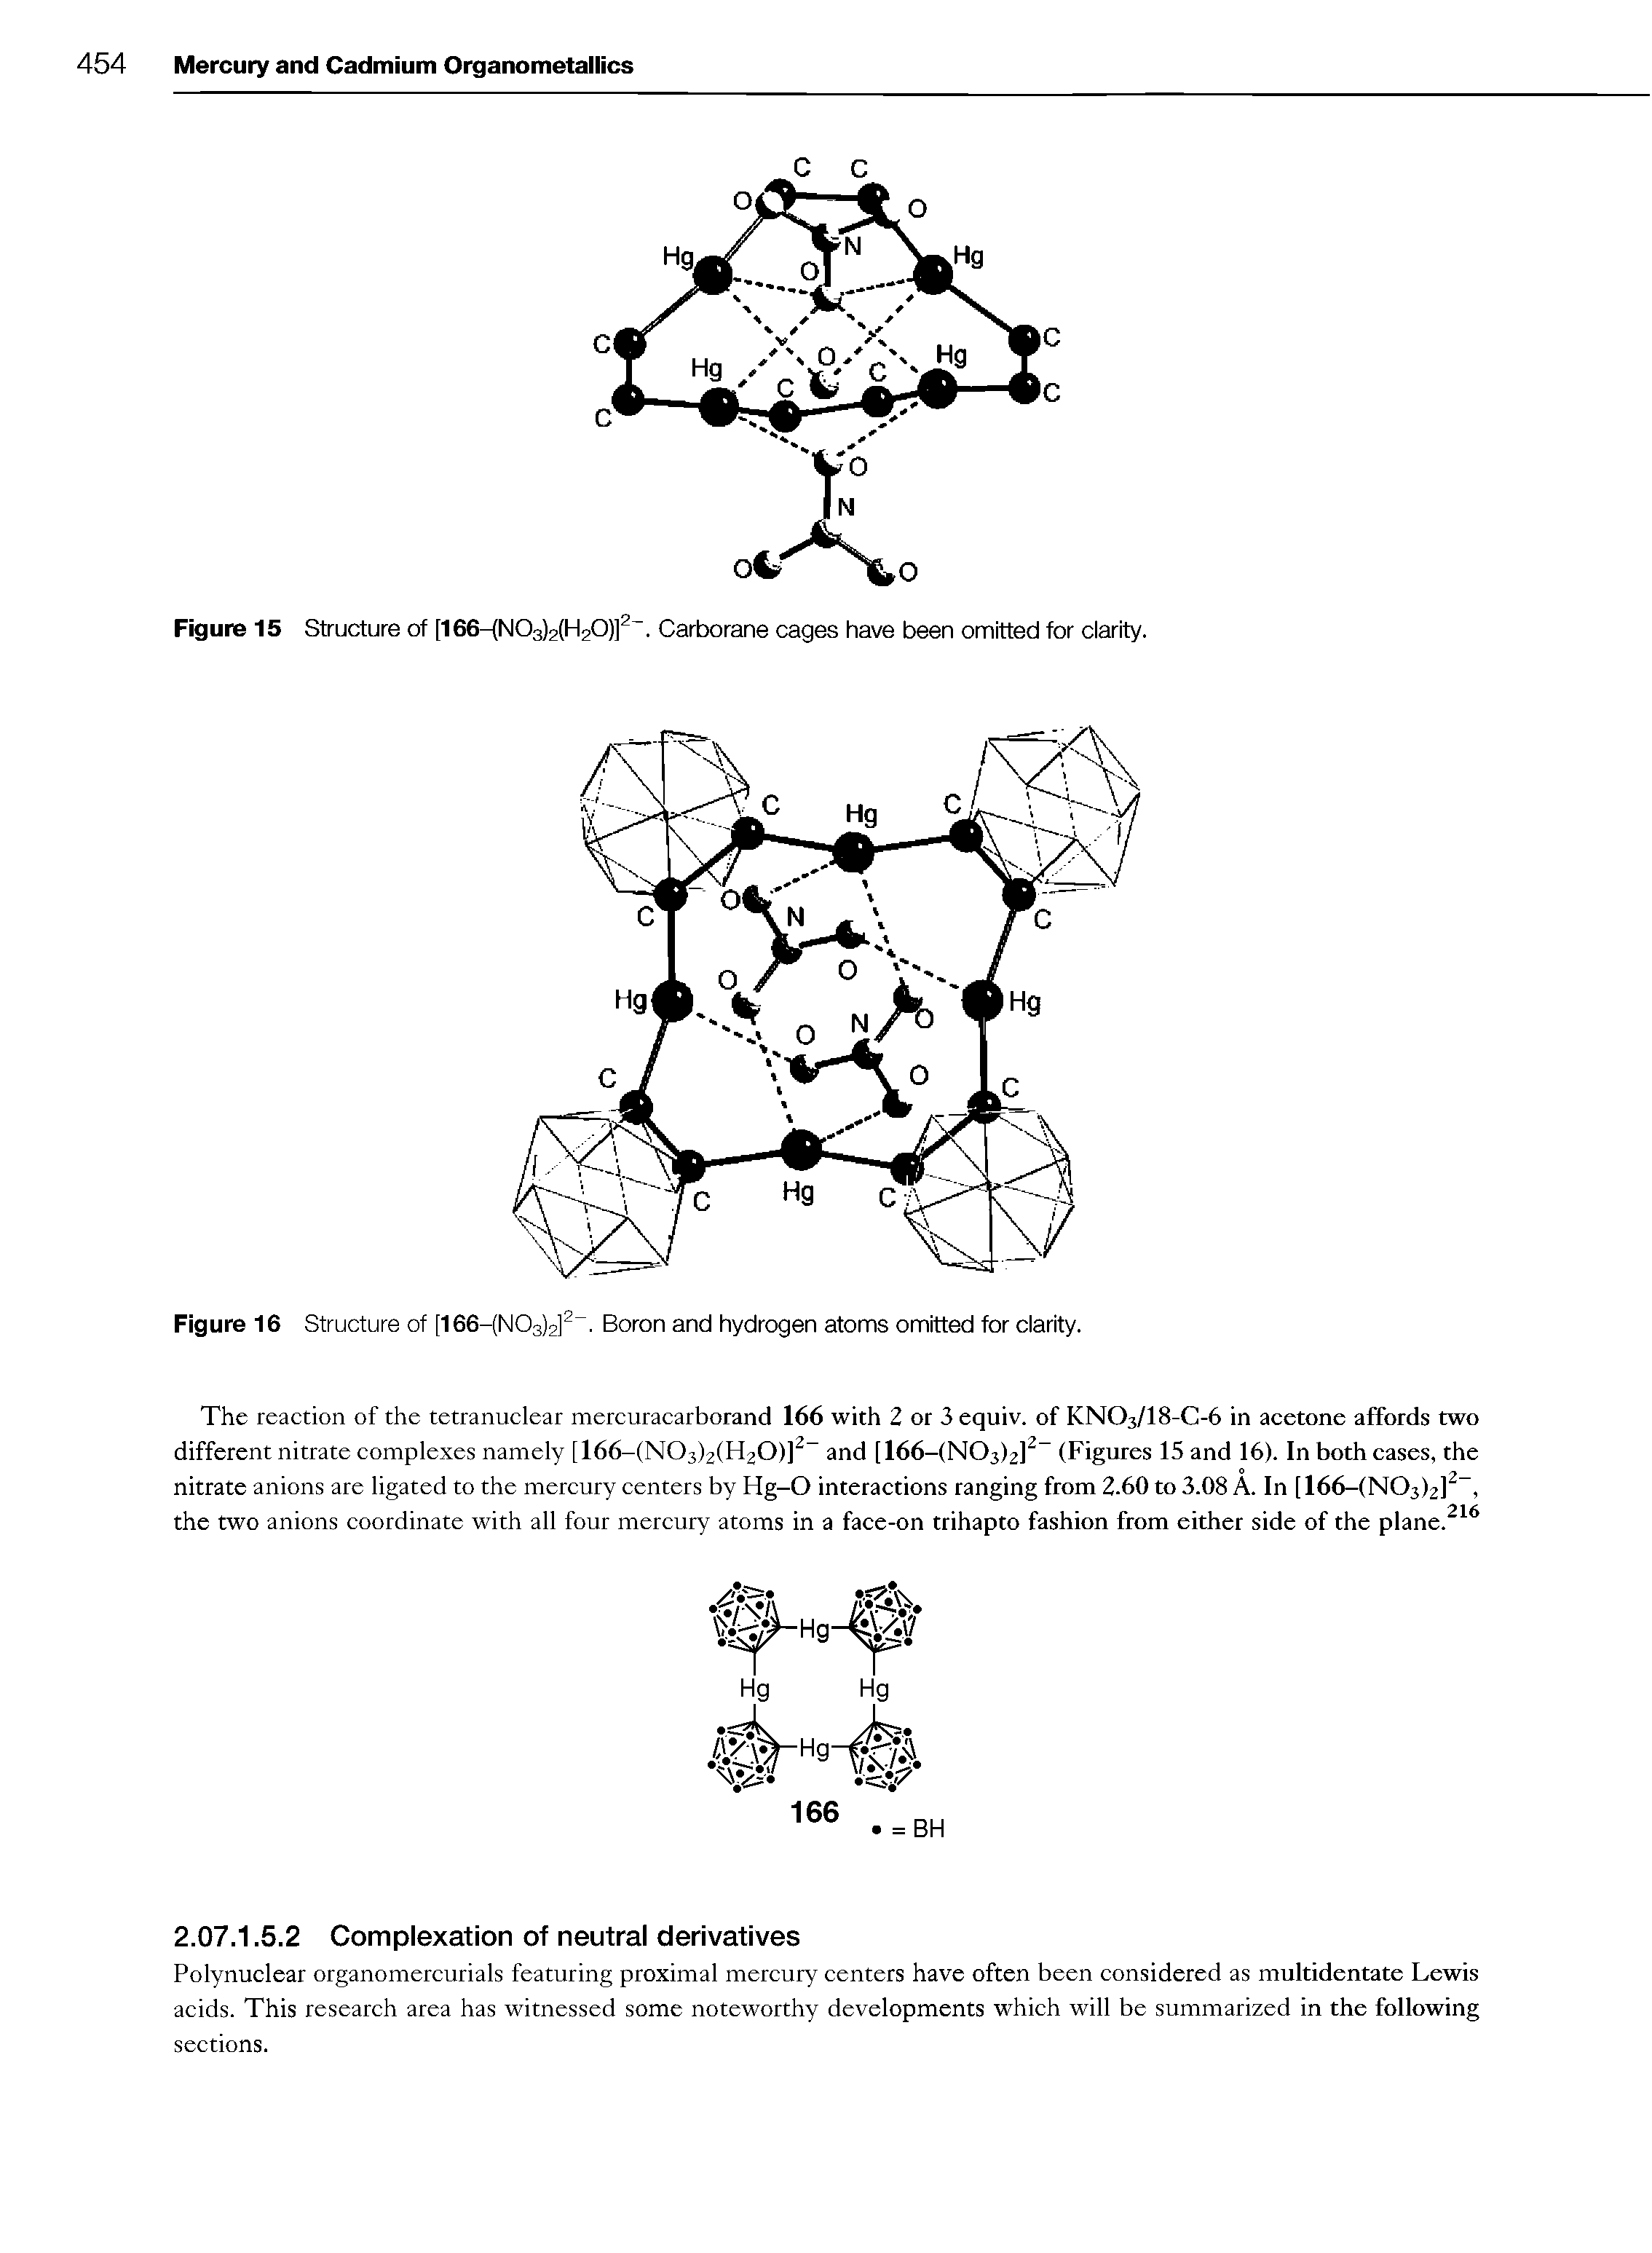 Figure 15 Structure of [166-(N03)2(H20)]2. Carborane cages have been omitted for clarity.